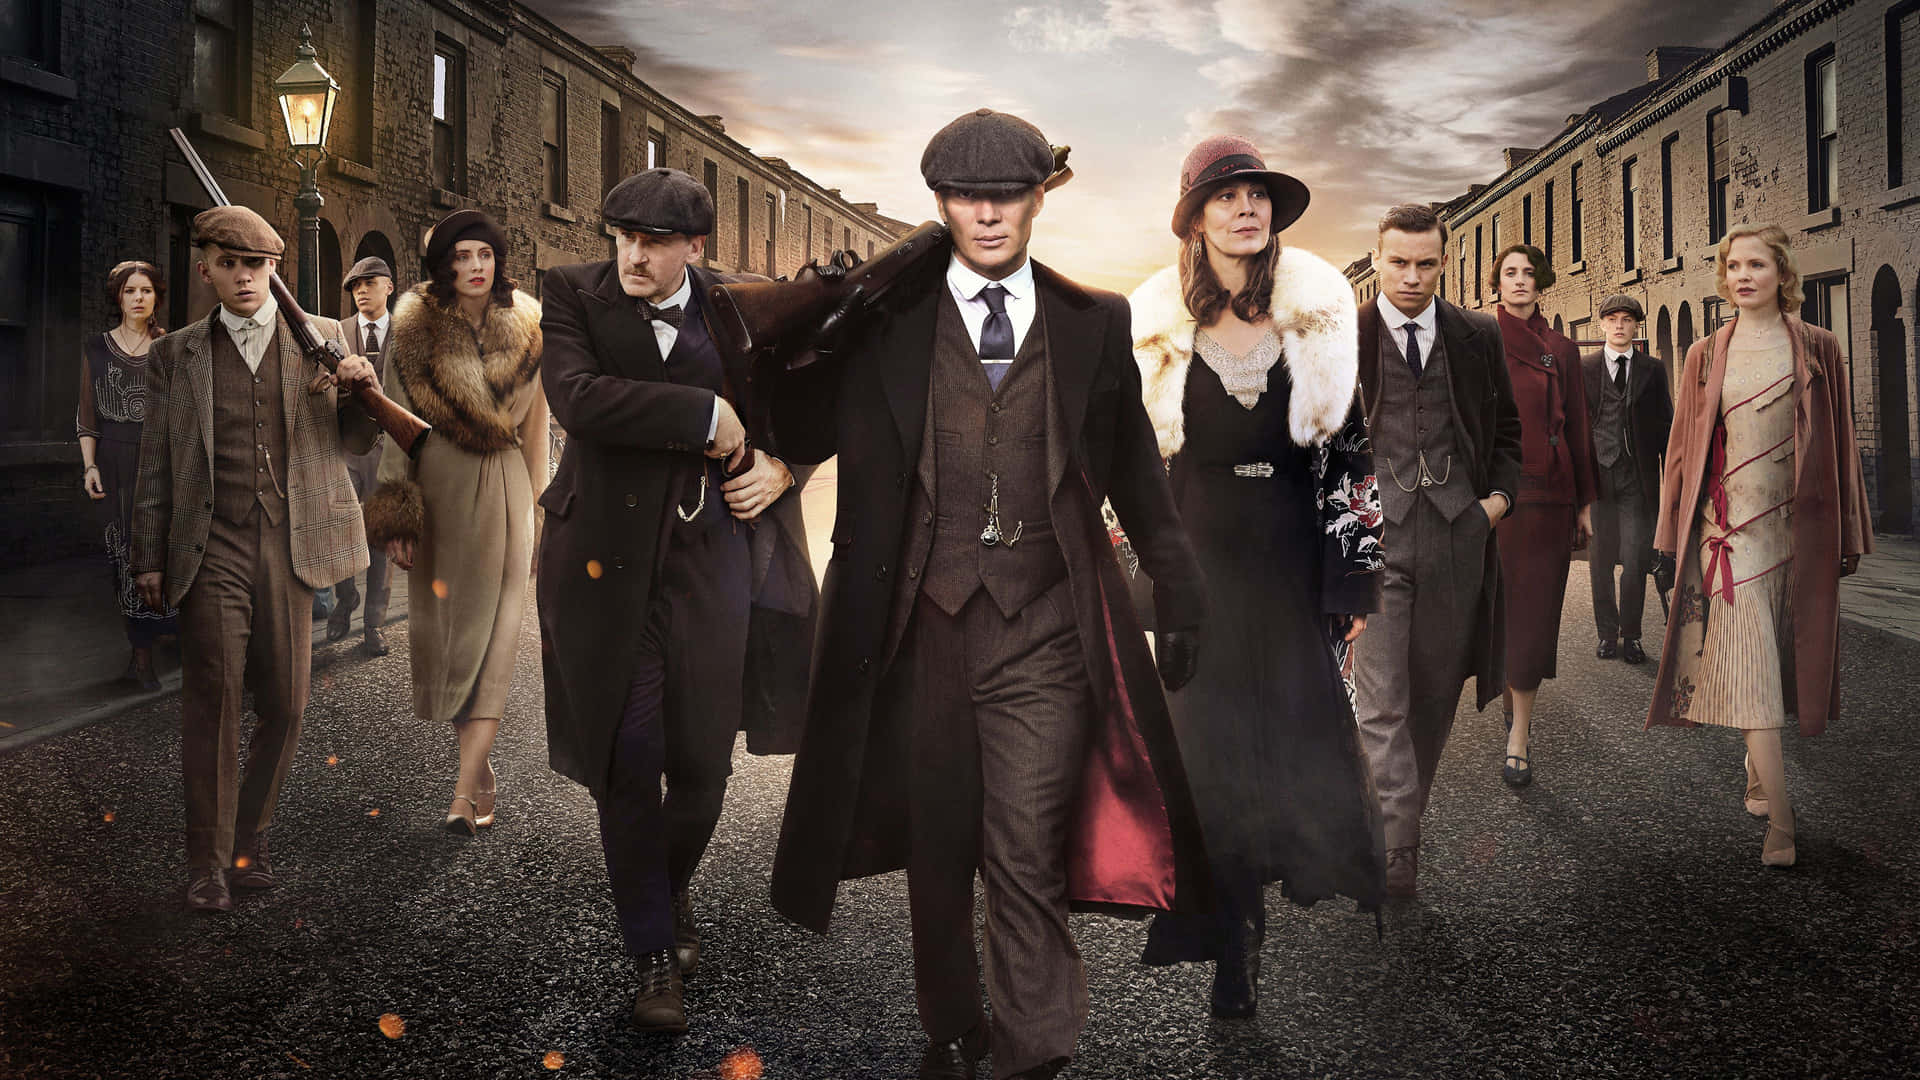 Step into the world of Peaky Blinders